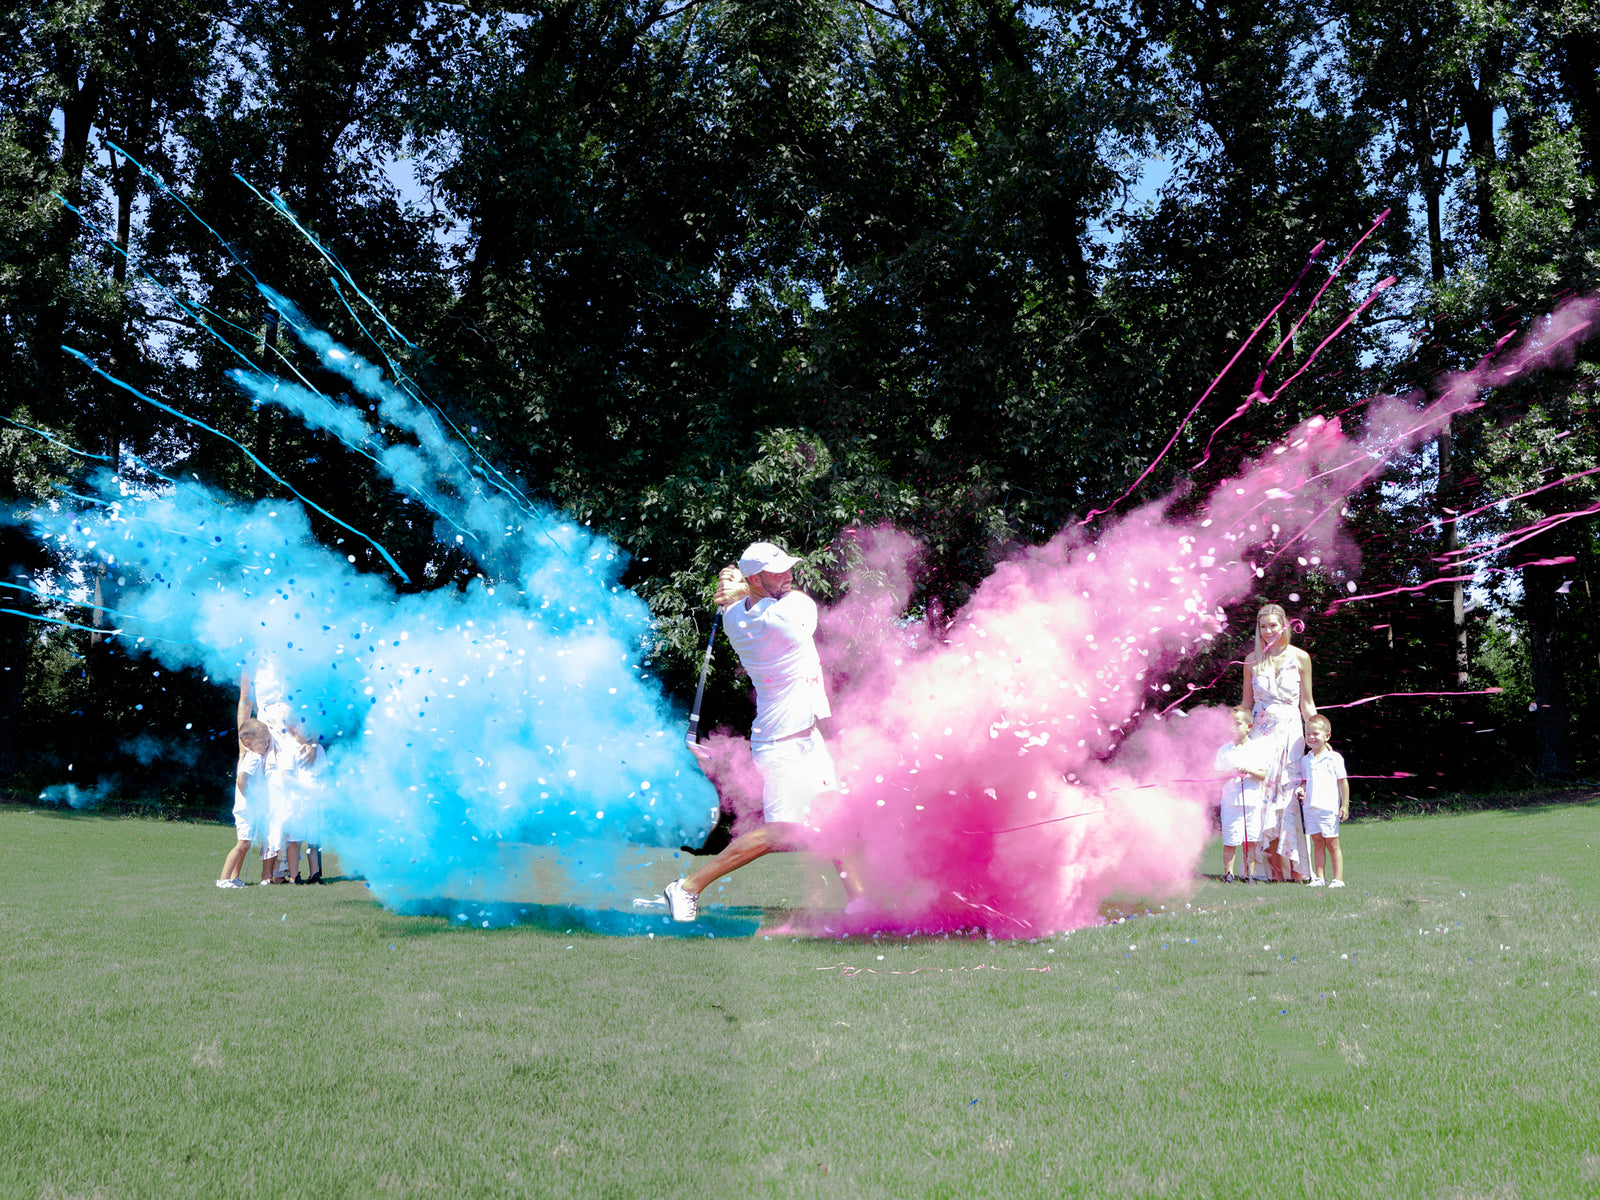 Golf Ball Gender Reveals: The Ultimate Way to Tee Up Your Big Announcement